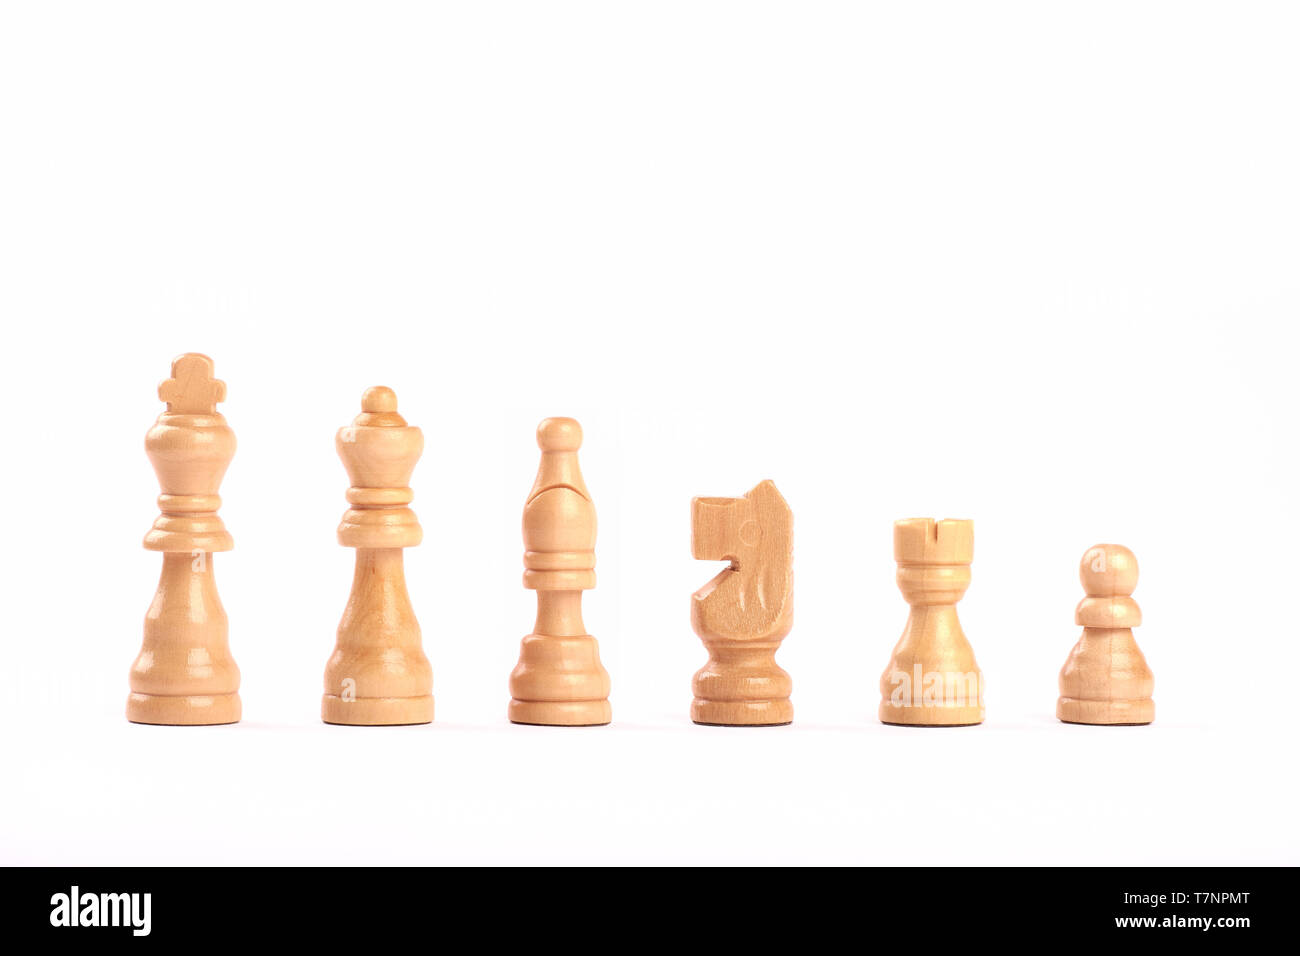 Set of white wooden chess figures standing in a row isolated on white background Stock Photo